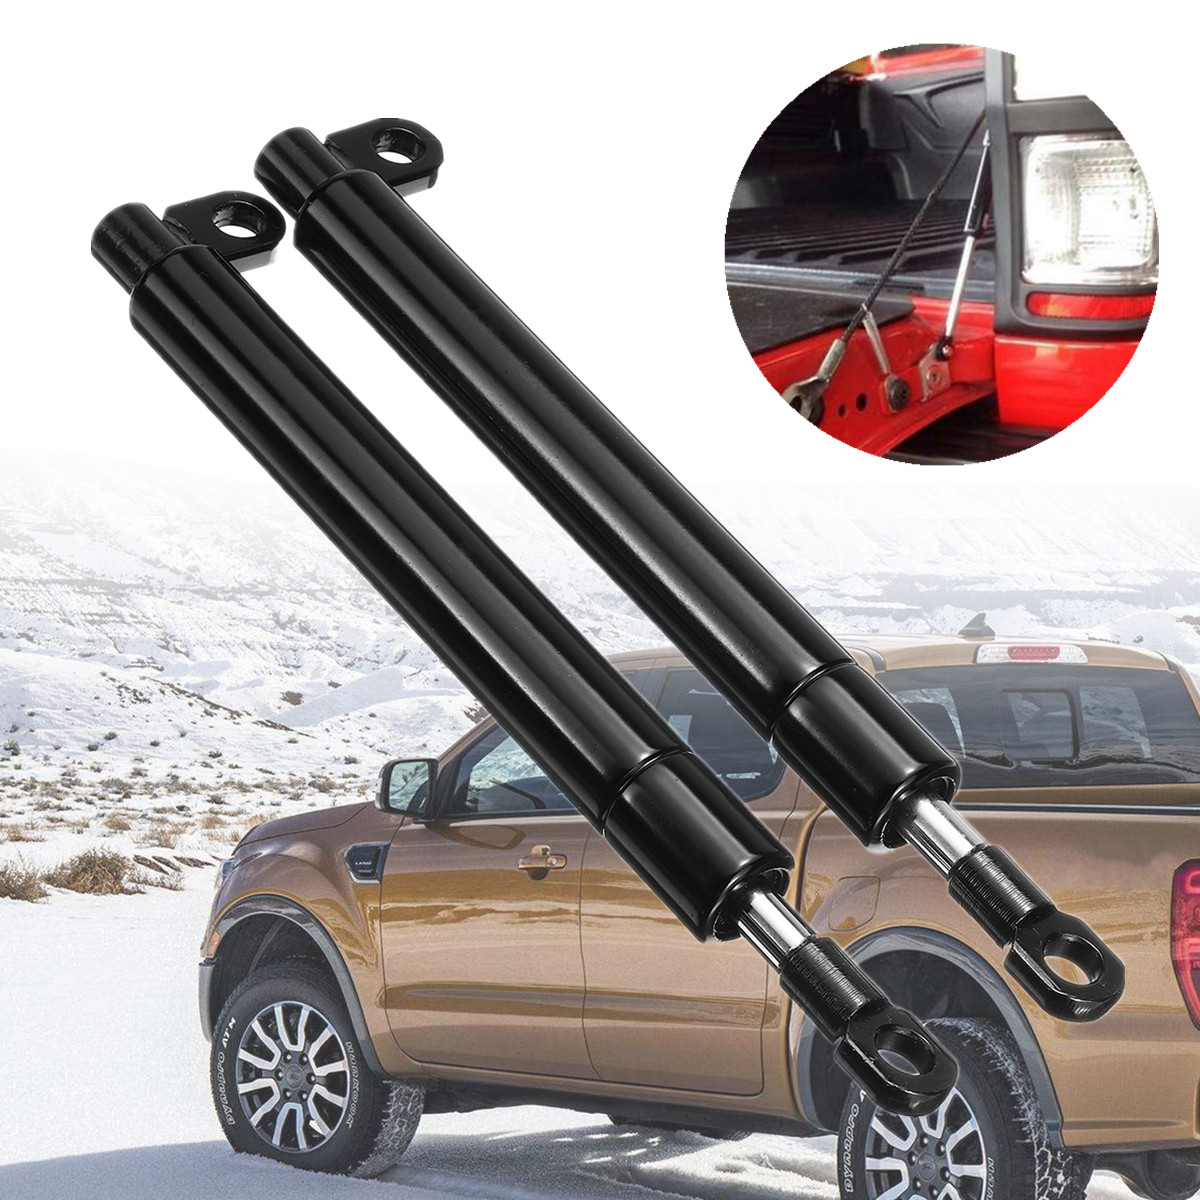 1 Pair Rear Tailgate Slow Down and Easy Up Strut Kit For Ford PX Ranger 2011-2017